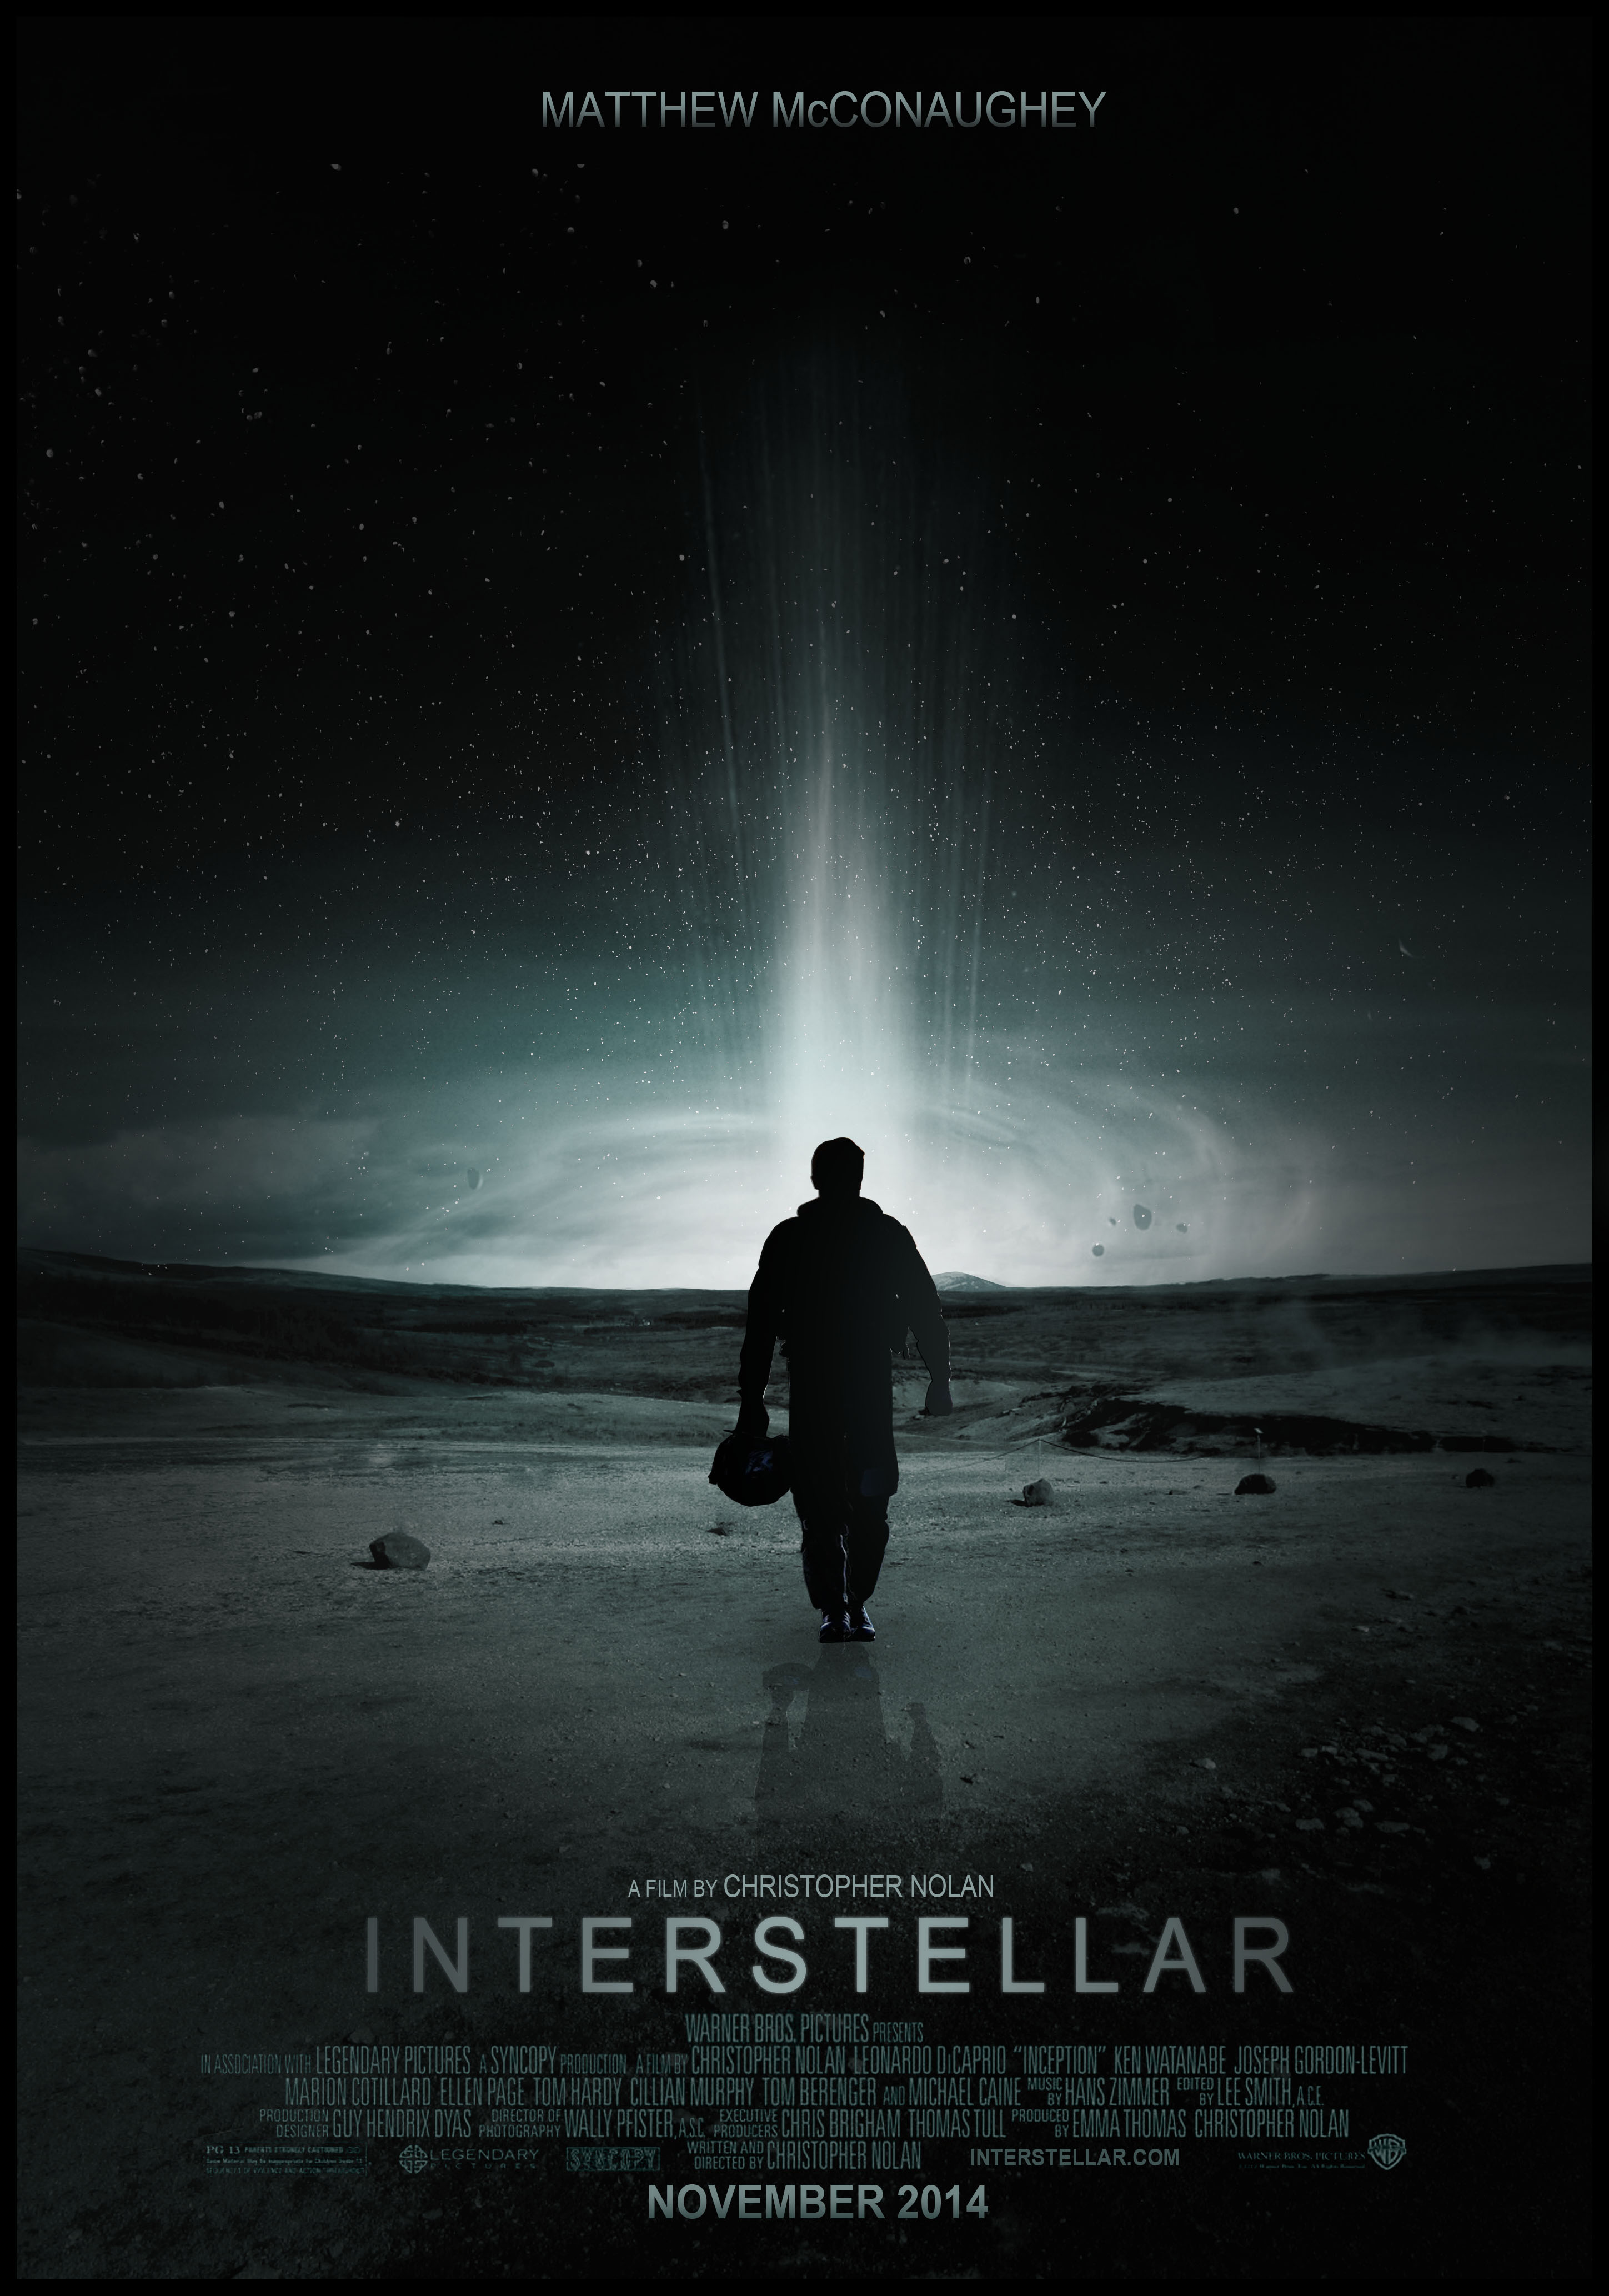 Interstellar" confuses and frustrates - The Signal